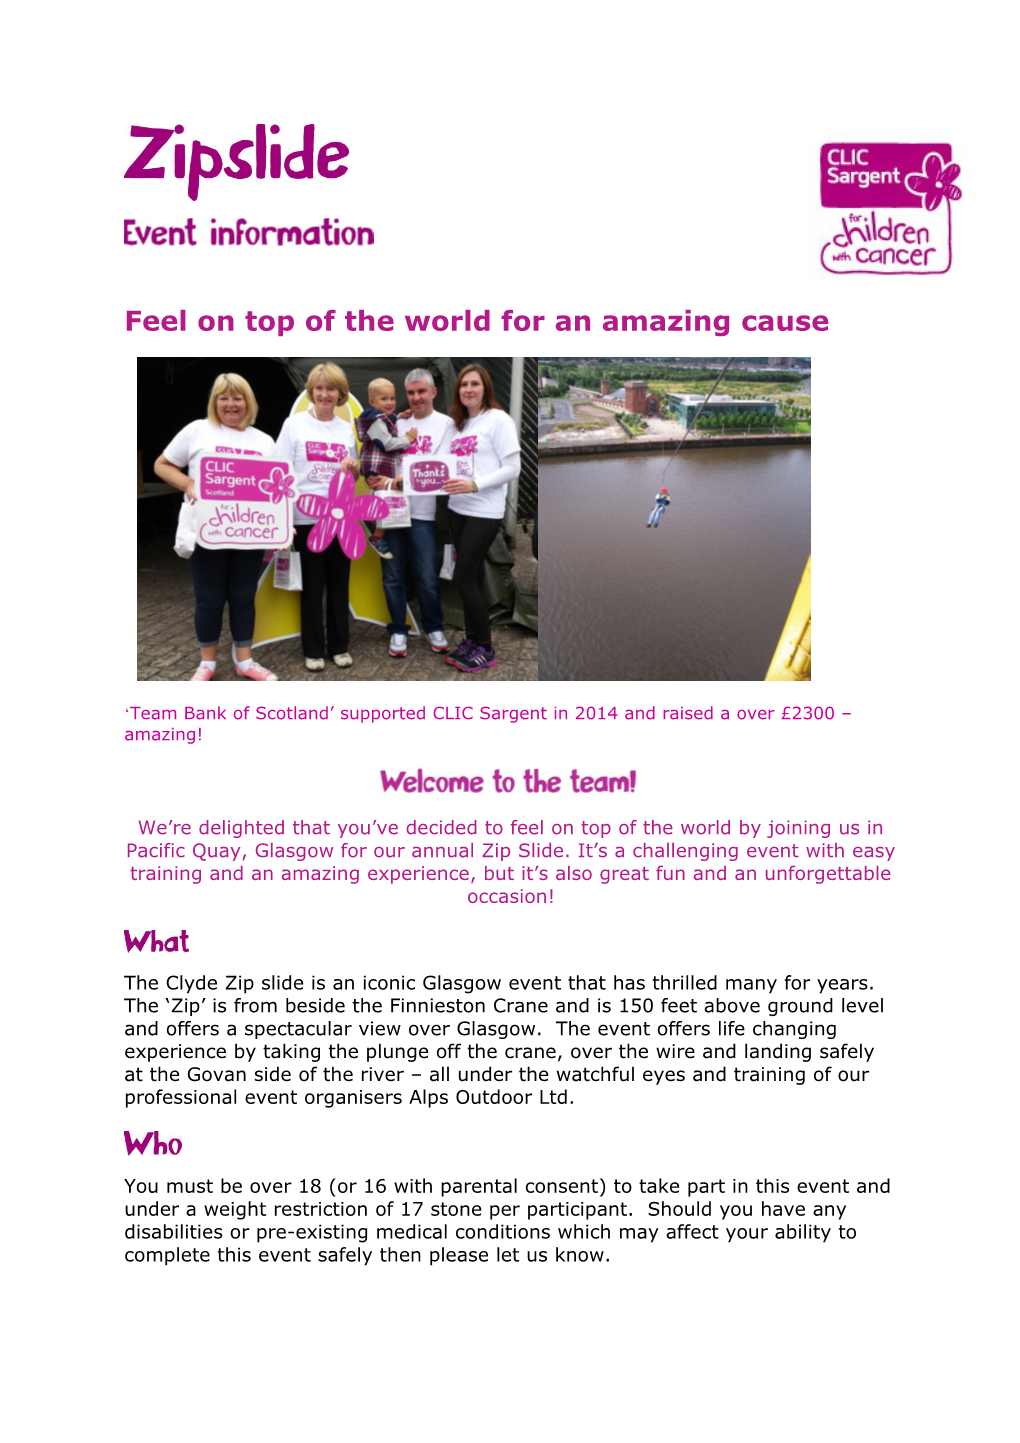 Team Bank of Scotland Supported CLIC Sargent in 2014 and Raised a Over 2300 Amazing!